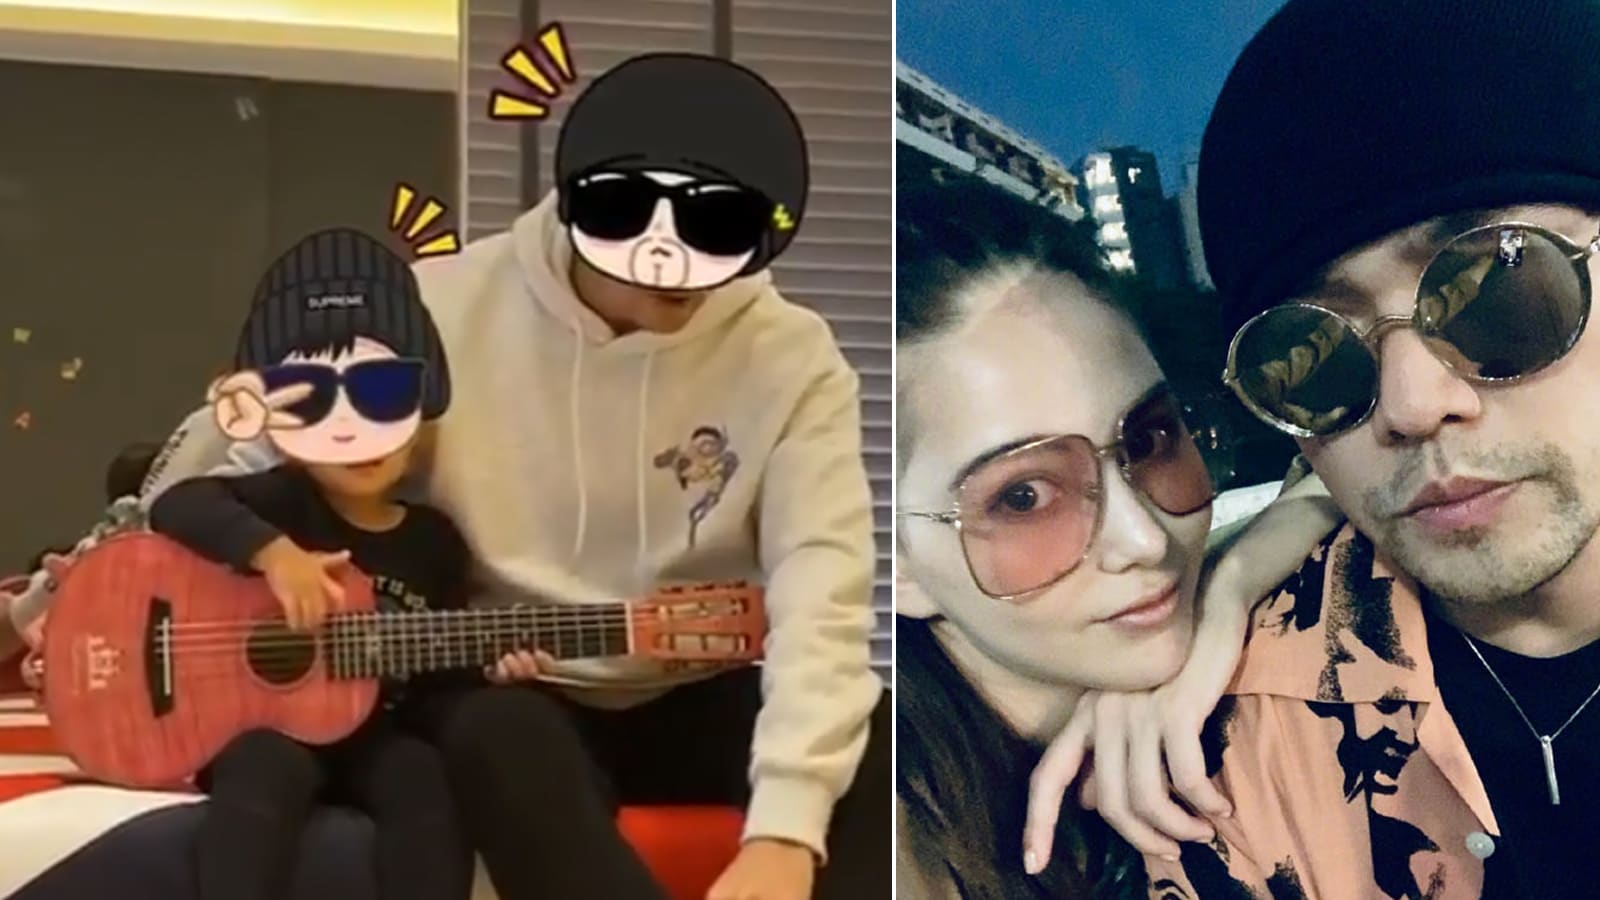 Jay Chou’s 2-Year-Old Son Melts Hearts With Vid Of Him Singing His Dad’s Hit Song